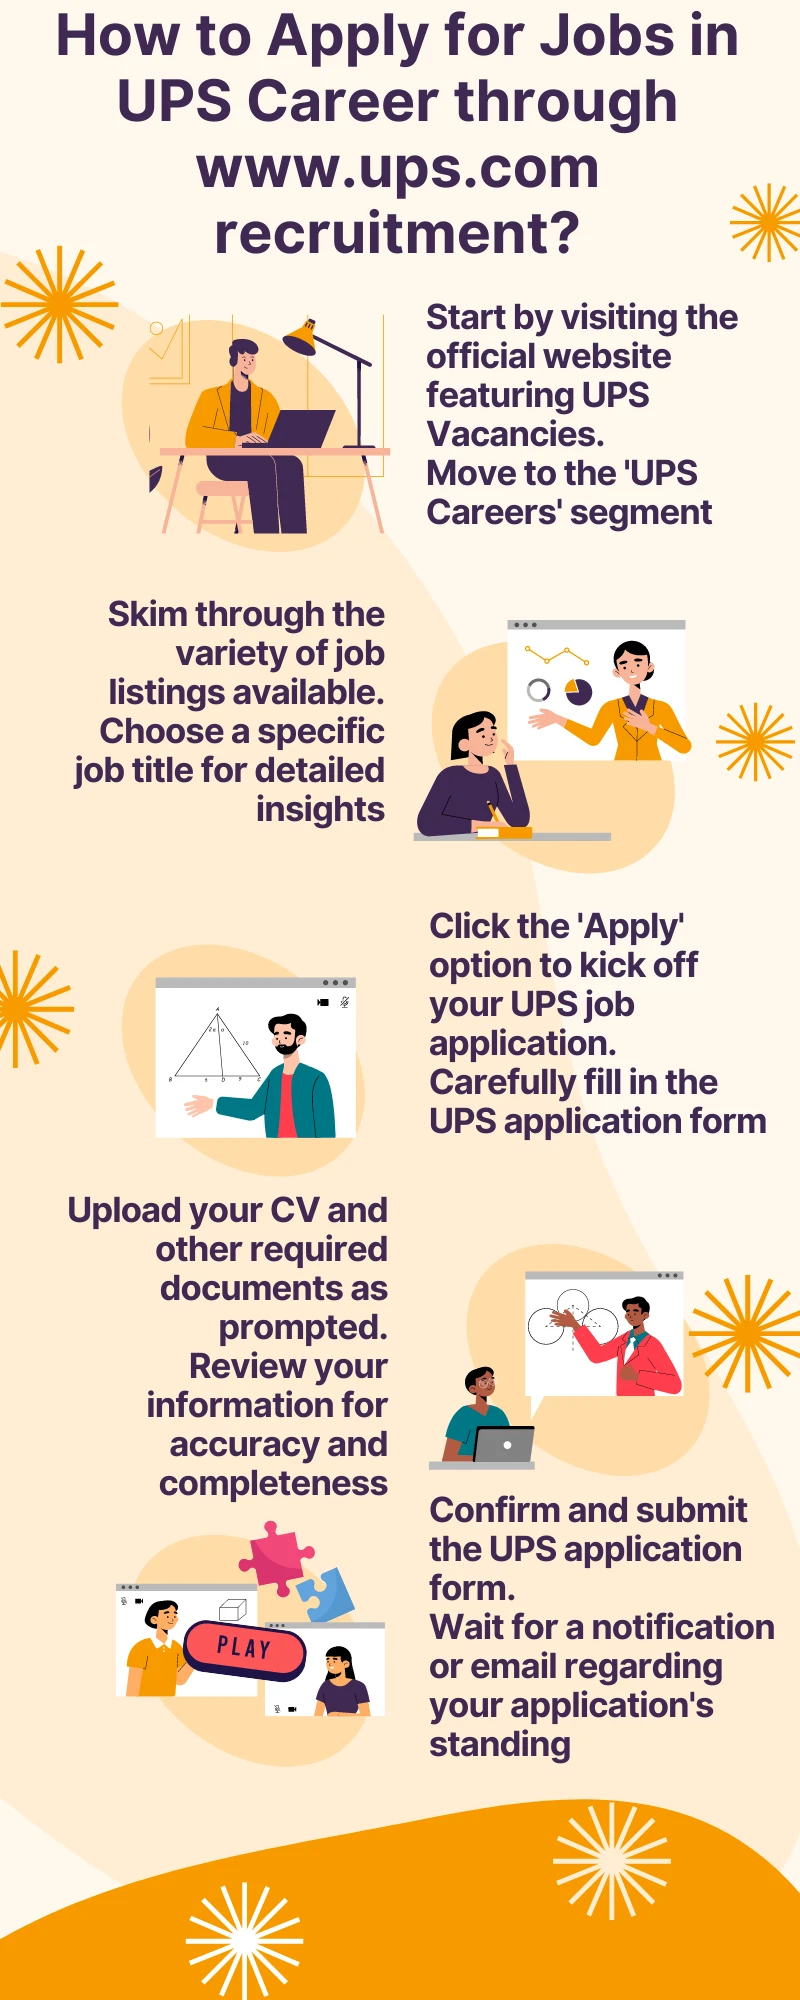 How to Apply for Jobs in UPS Career through www.ups.com recruitment?